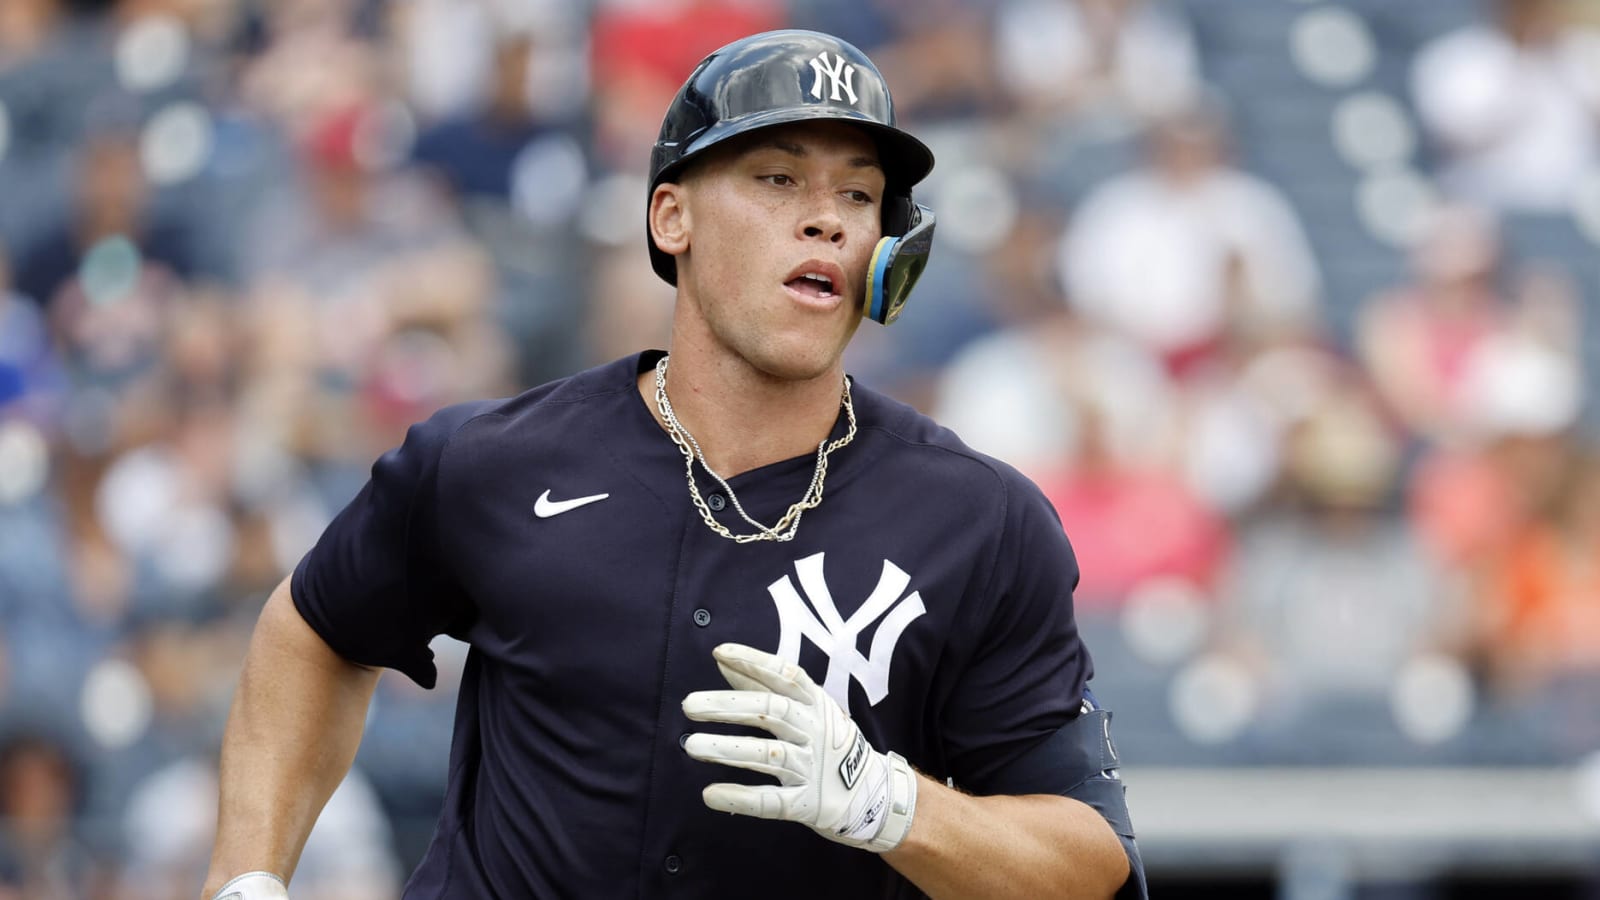 Yankees made contract offer of over $200M to Aaron Judge